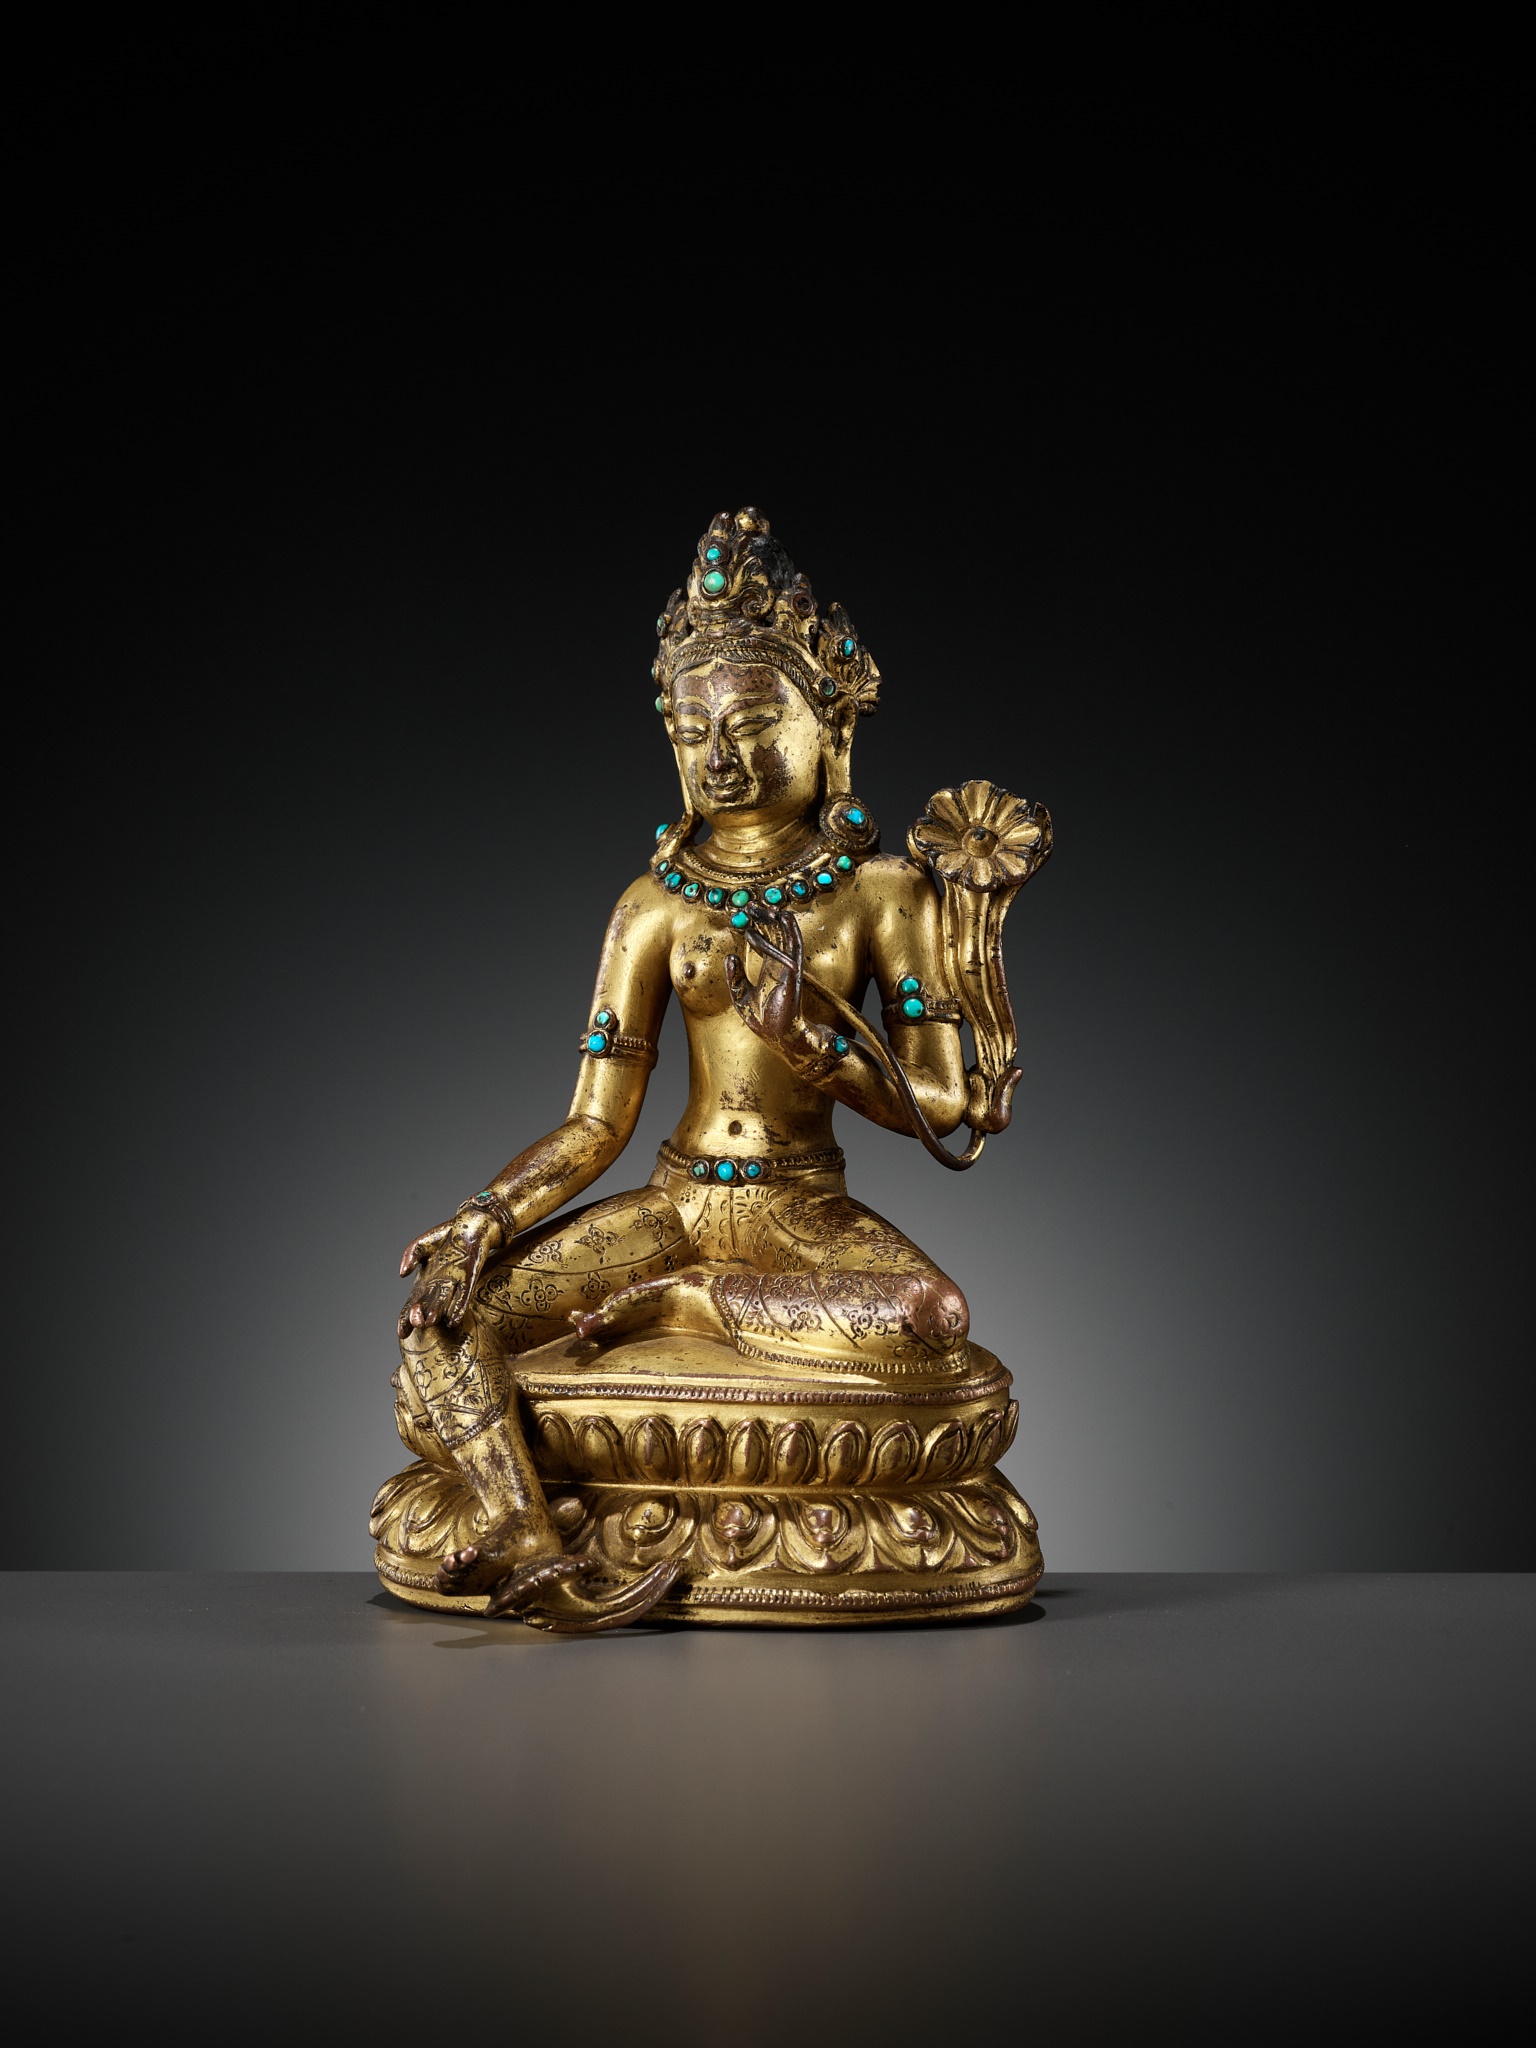 A GILT AND TURQUOISE-INLAID COPPER ALLOY FIGURE OF GREEN TARA, DENSATIL STYLE, TIBET, 14TH CENTURY - Image 7 of 16